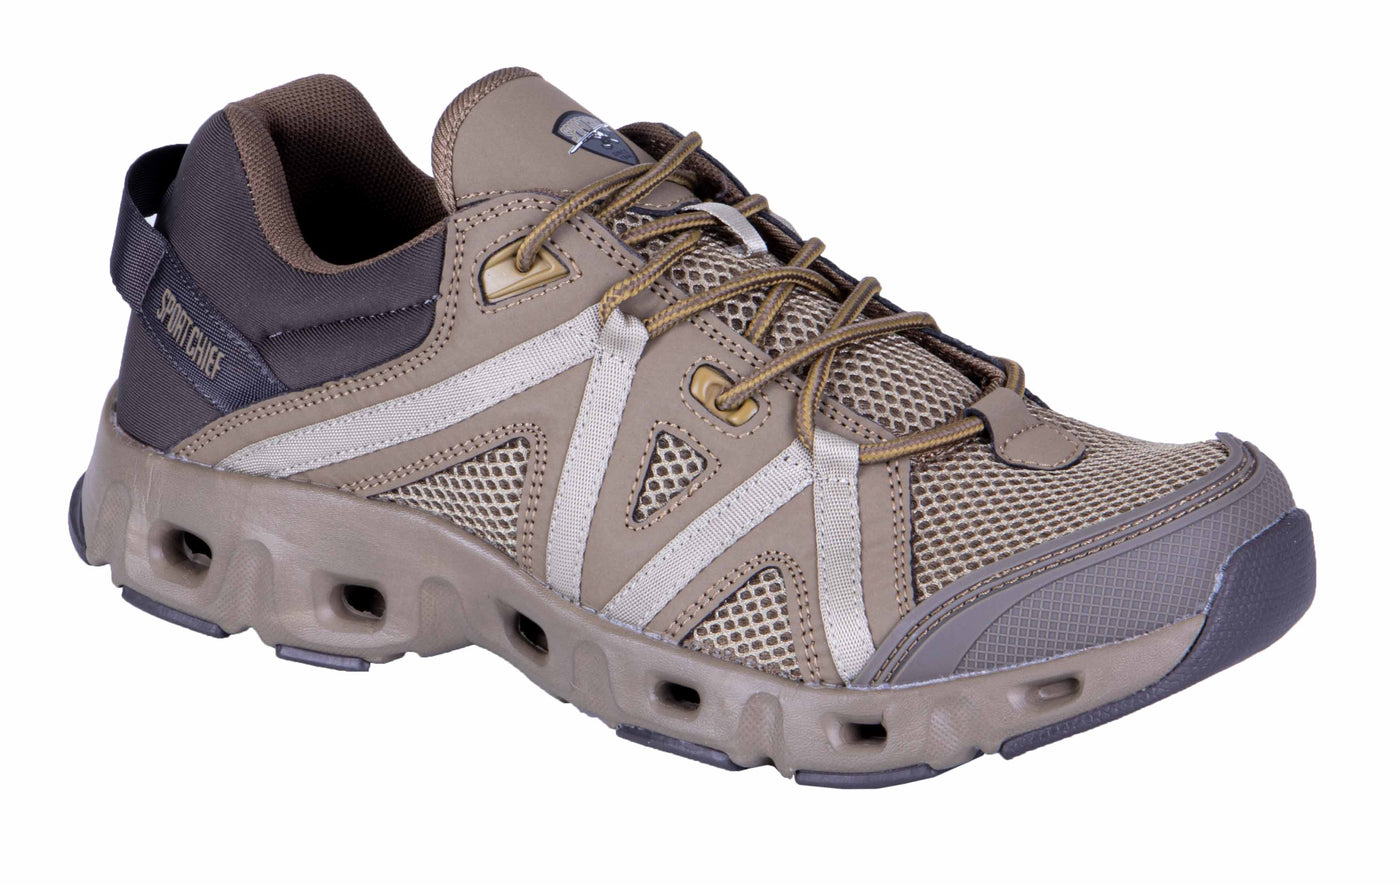 "Oceanic" men's fishing shoe with water evacuation system